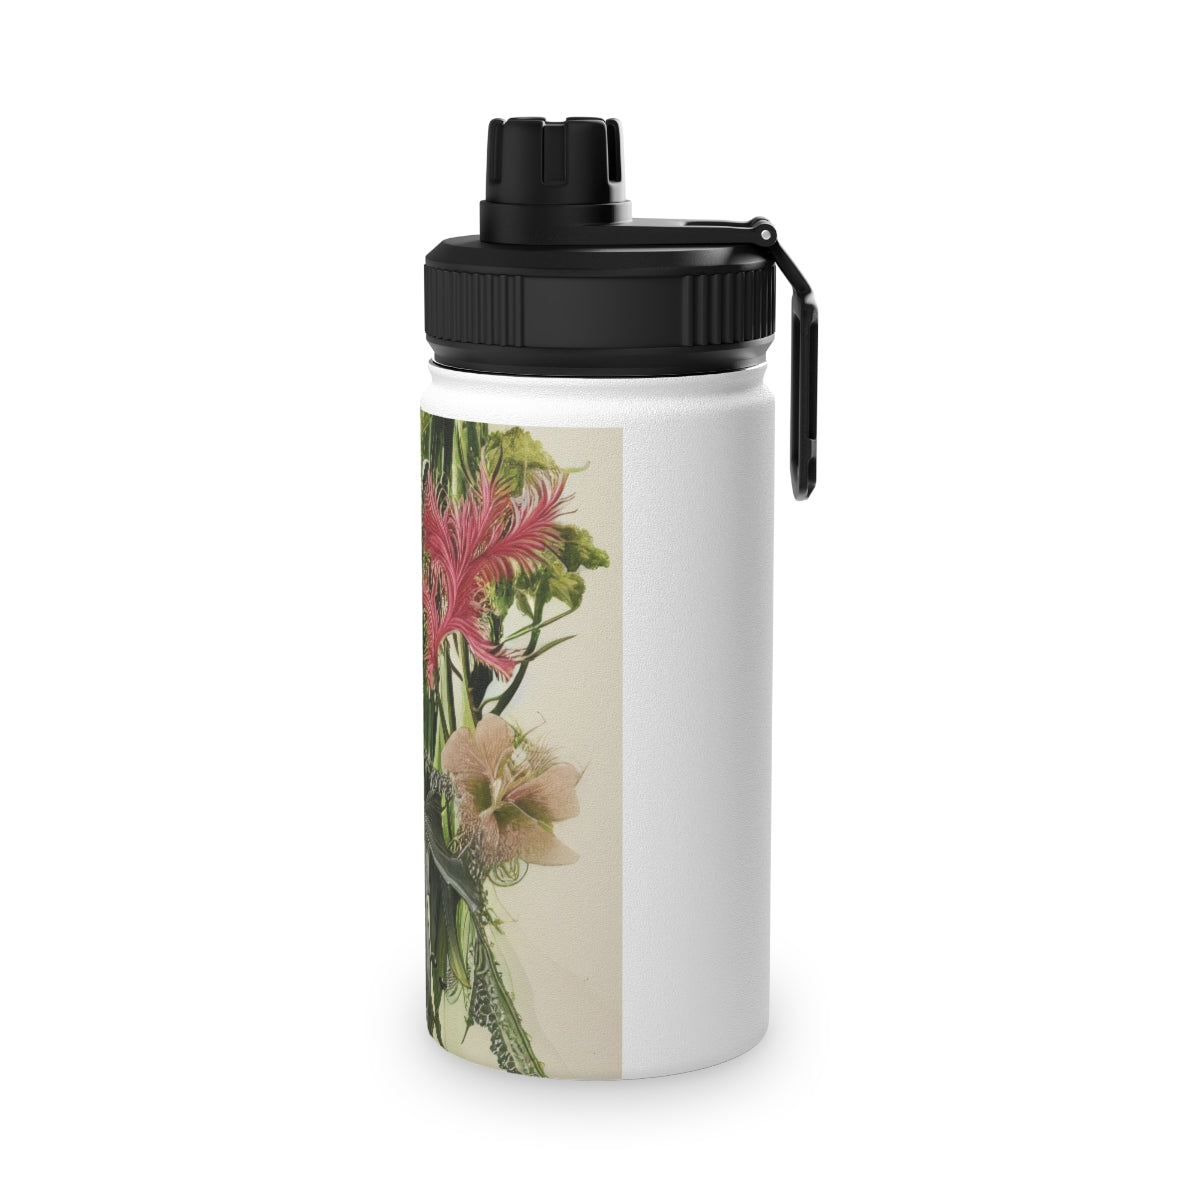 Spectacular Botanical Art From A Master Illustrator Stainless Steel Water Bottle Sports Lid